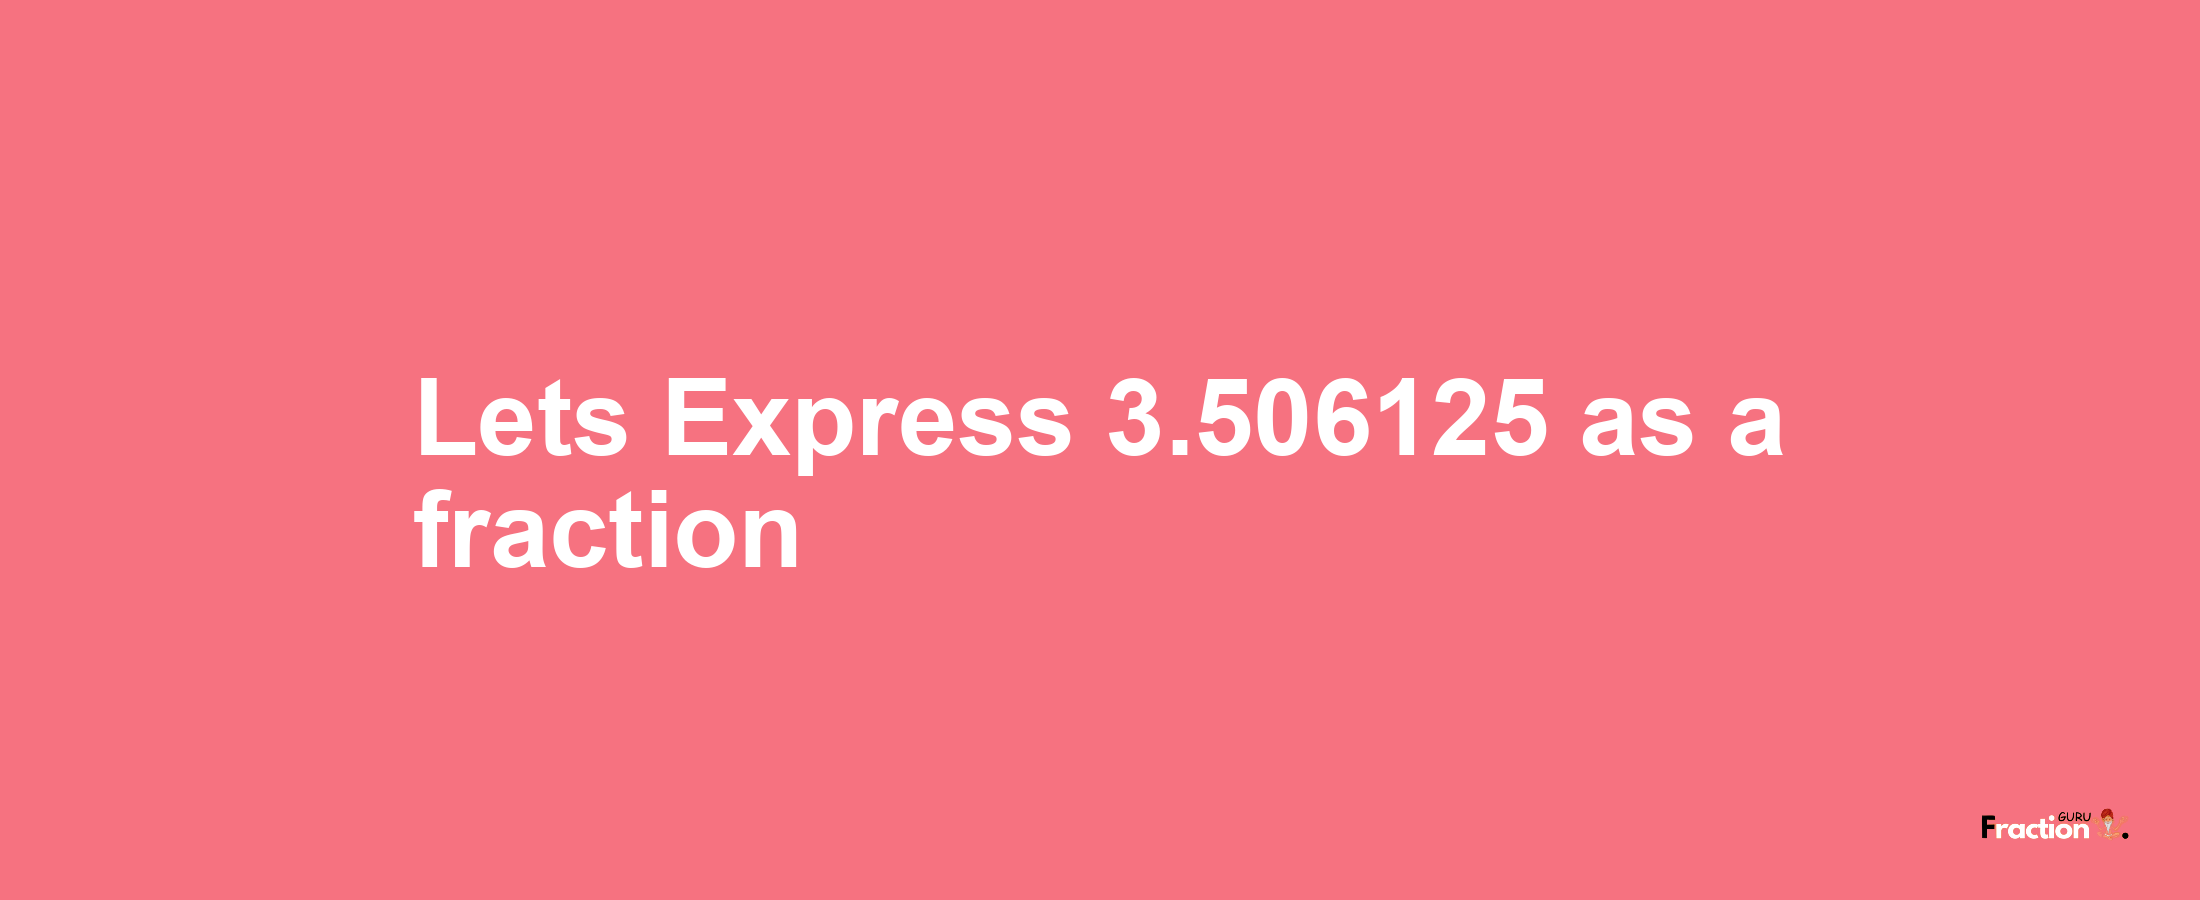 Lets Express 3.506125 as afraction